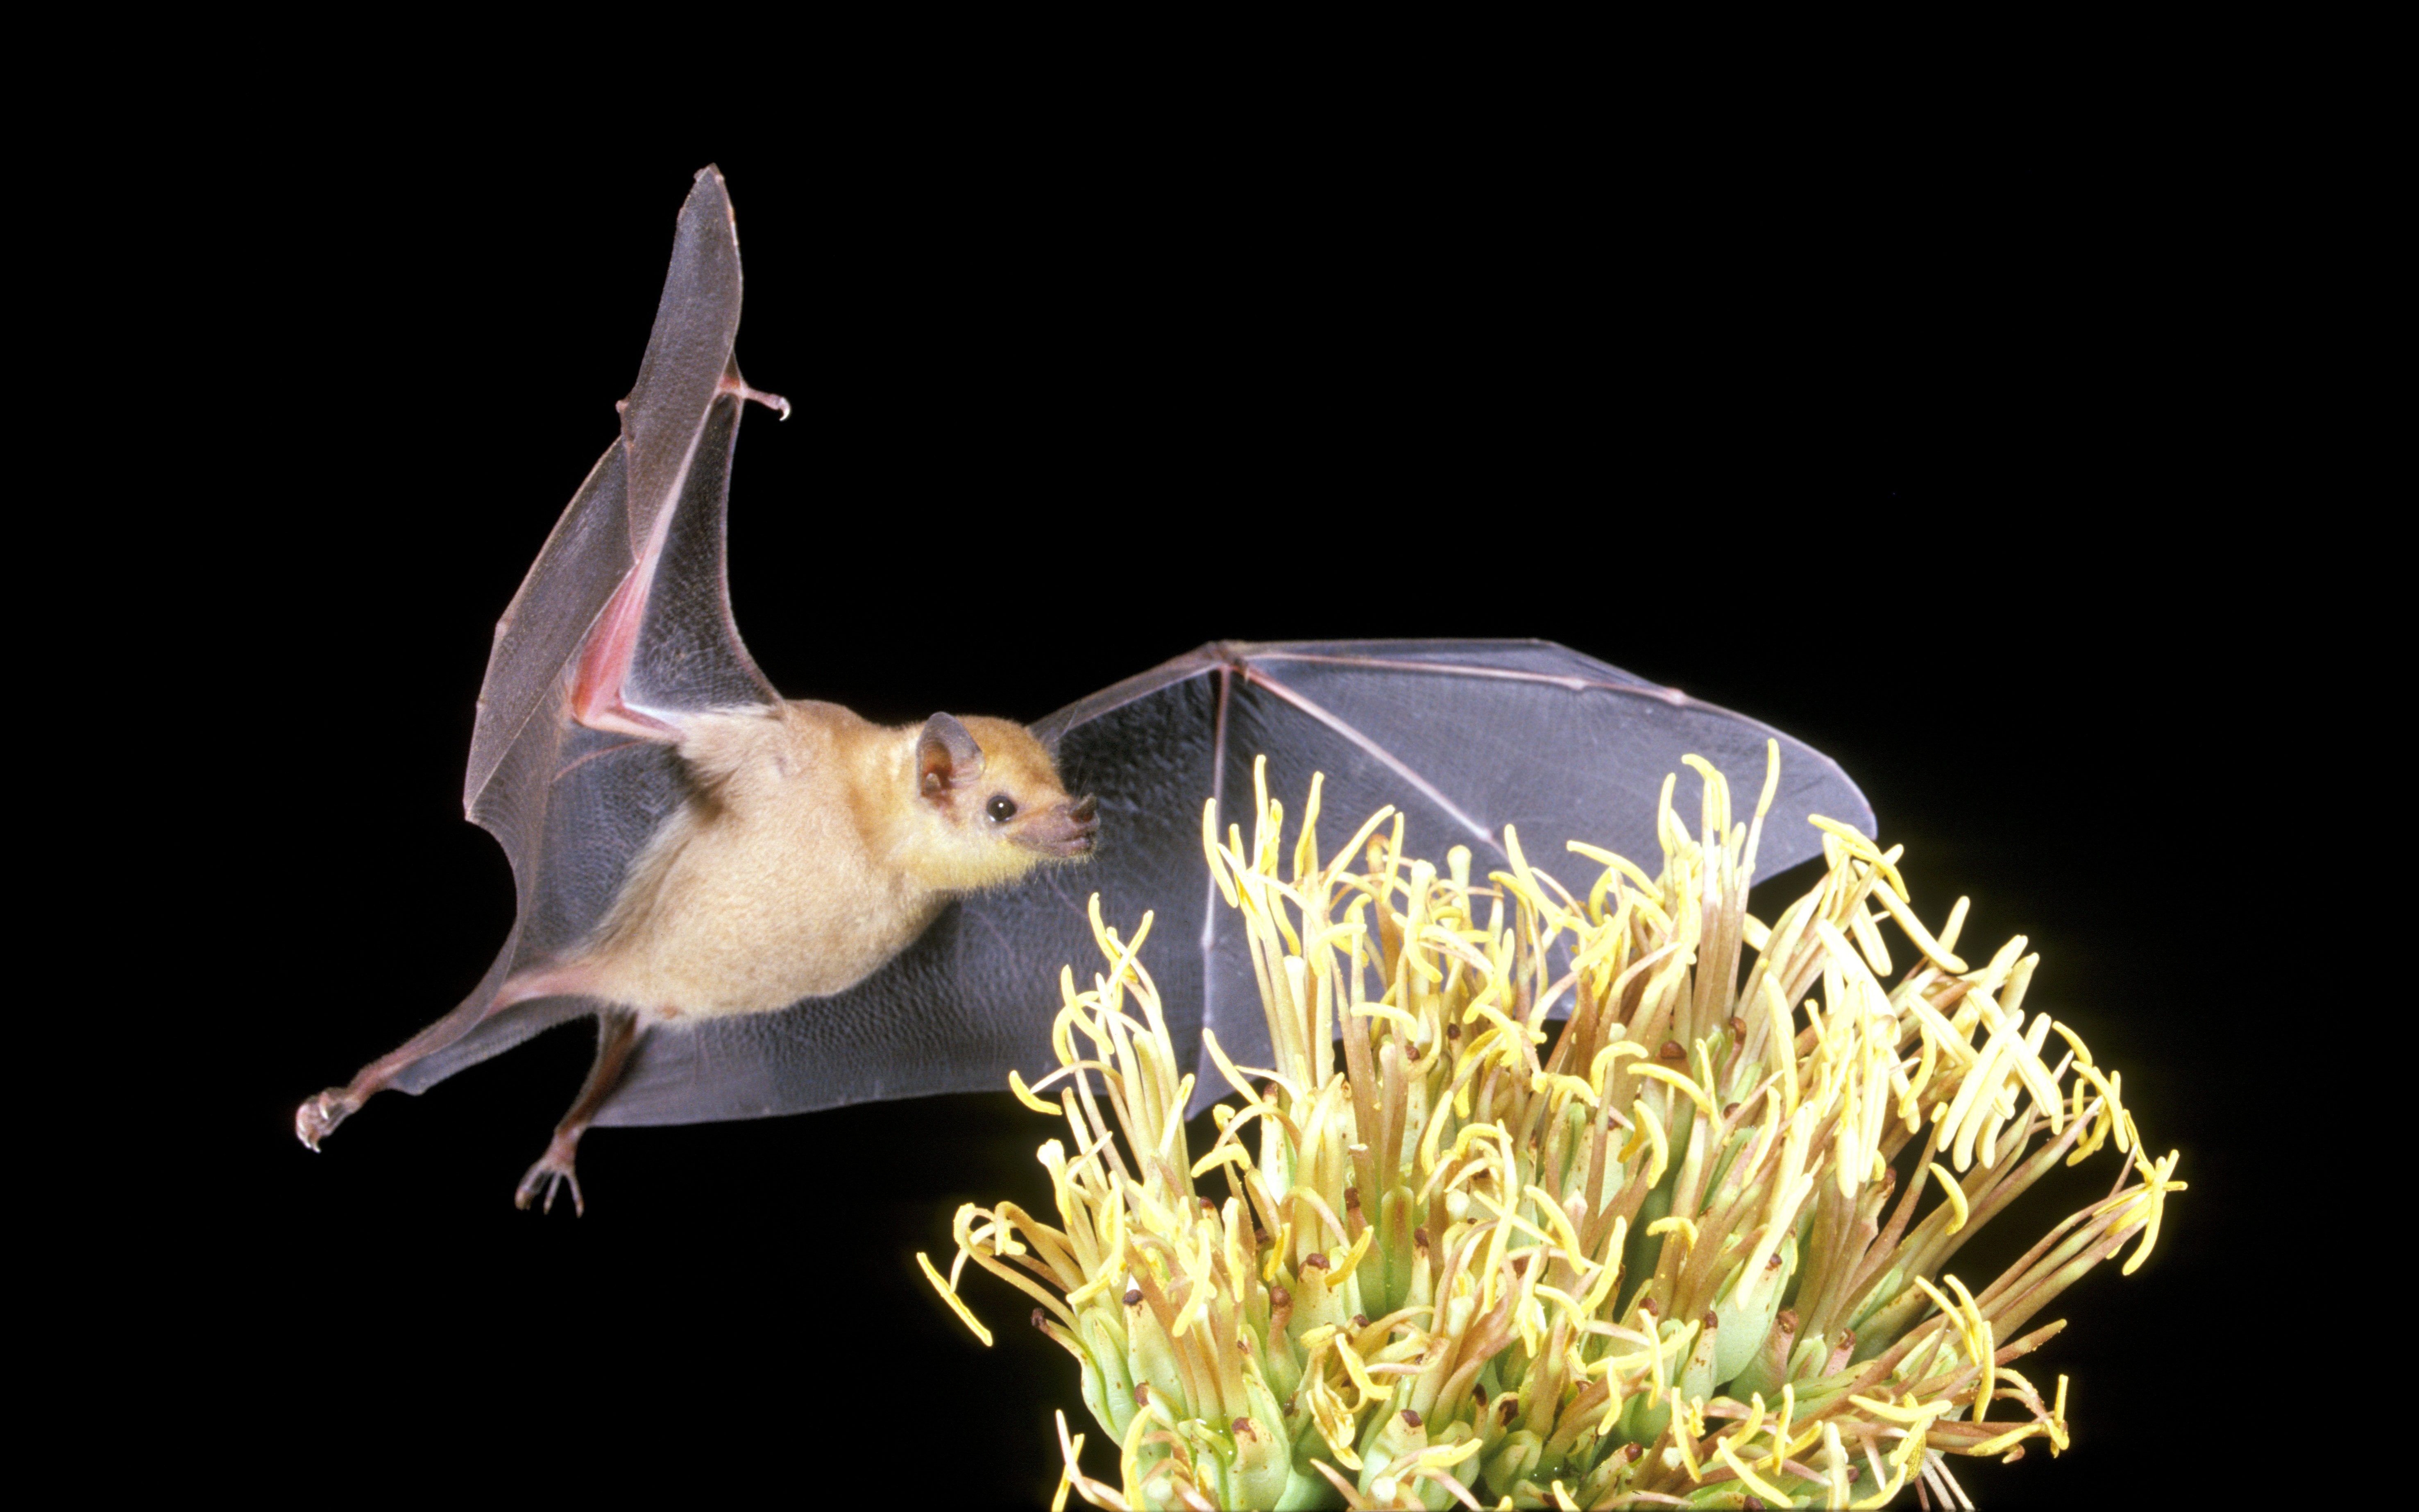 A Lesser Long-nosed bat with dark brown wings and a light tan, fuzzy boddy flying near a pollen-laden flower with many yellow stamen.